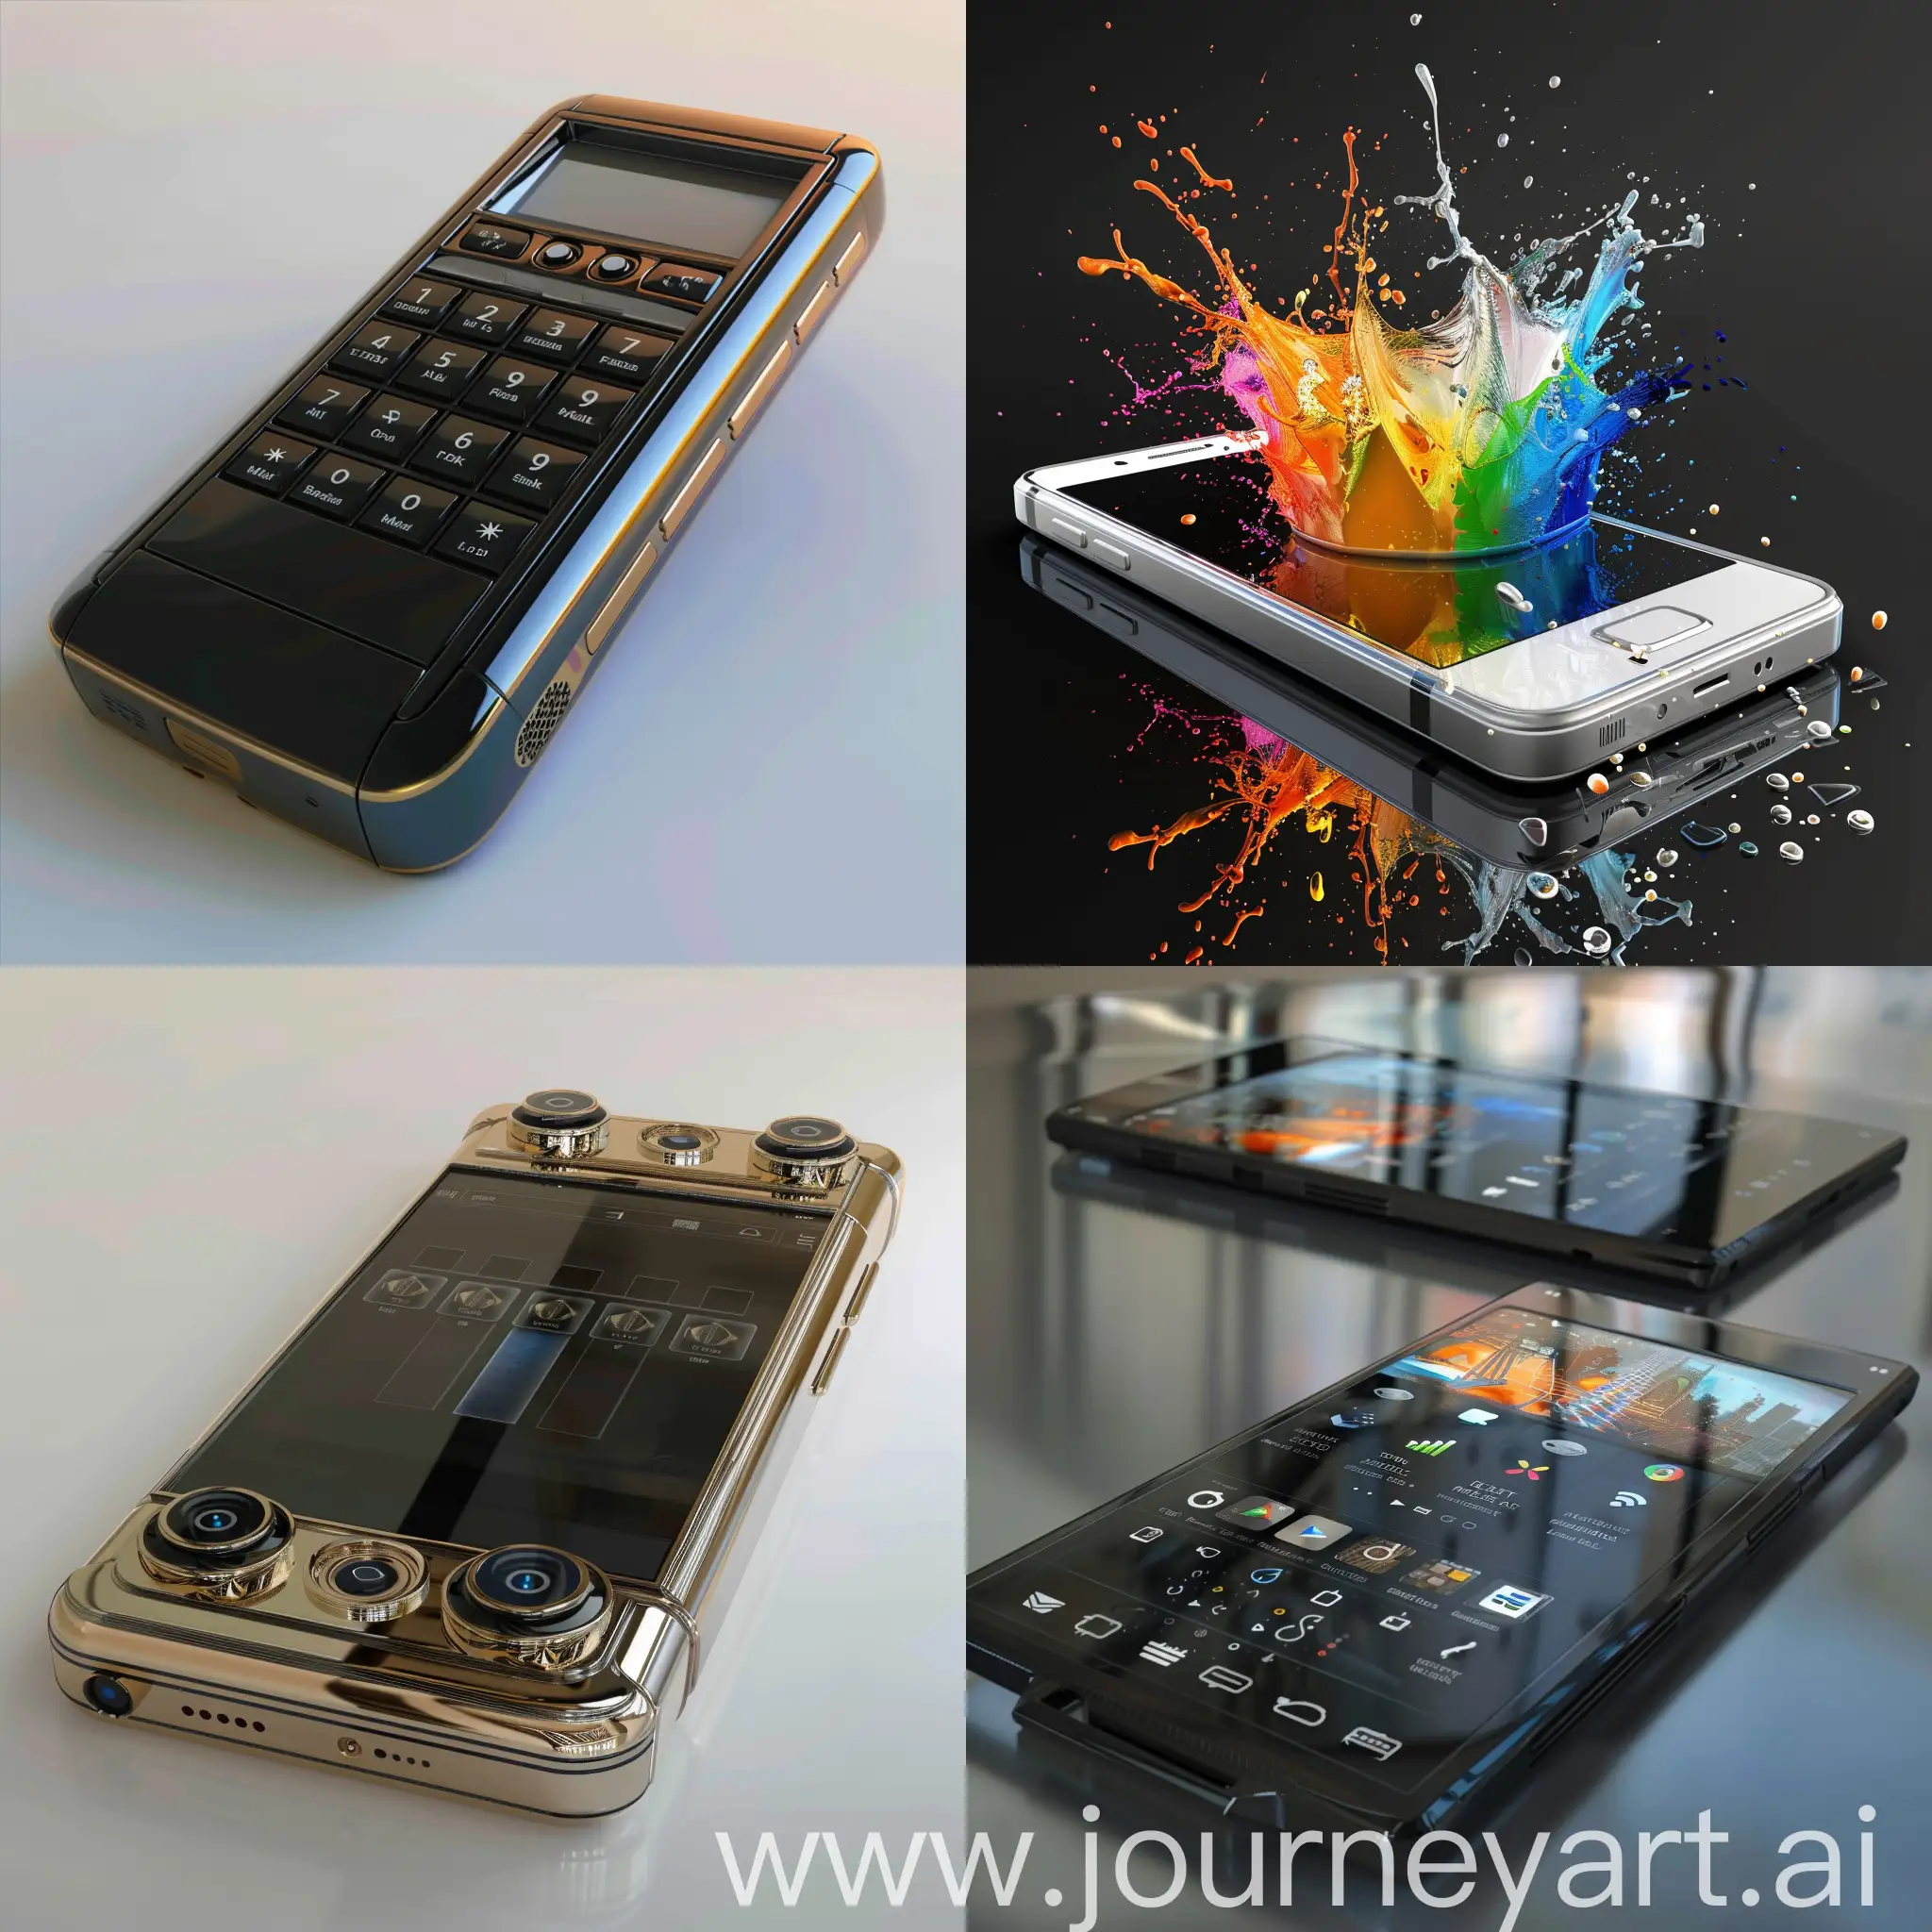 Innovative-Mobile-Phone-Design-Concept-Futuristic-Device-with-Advanced-Features